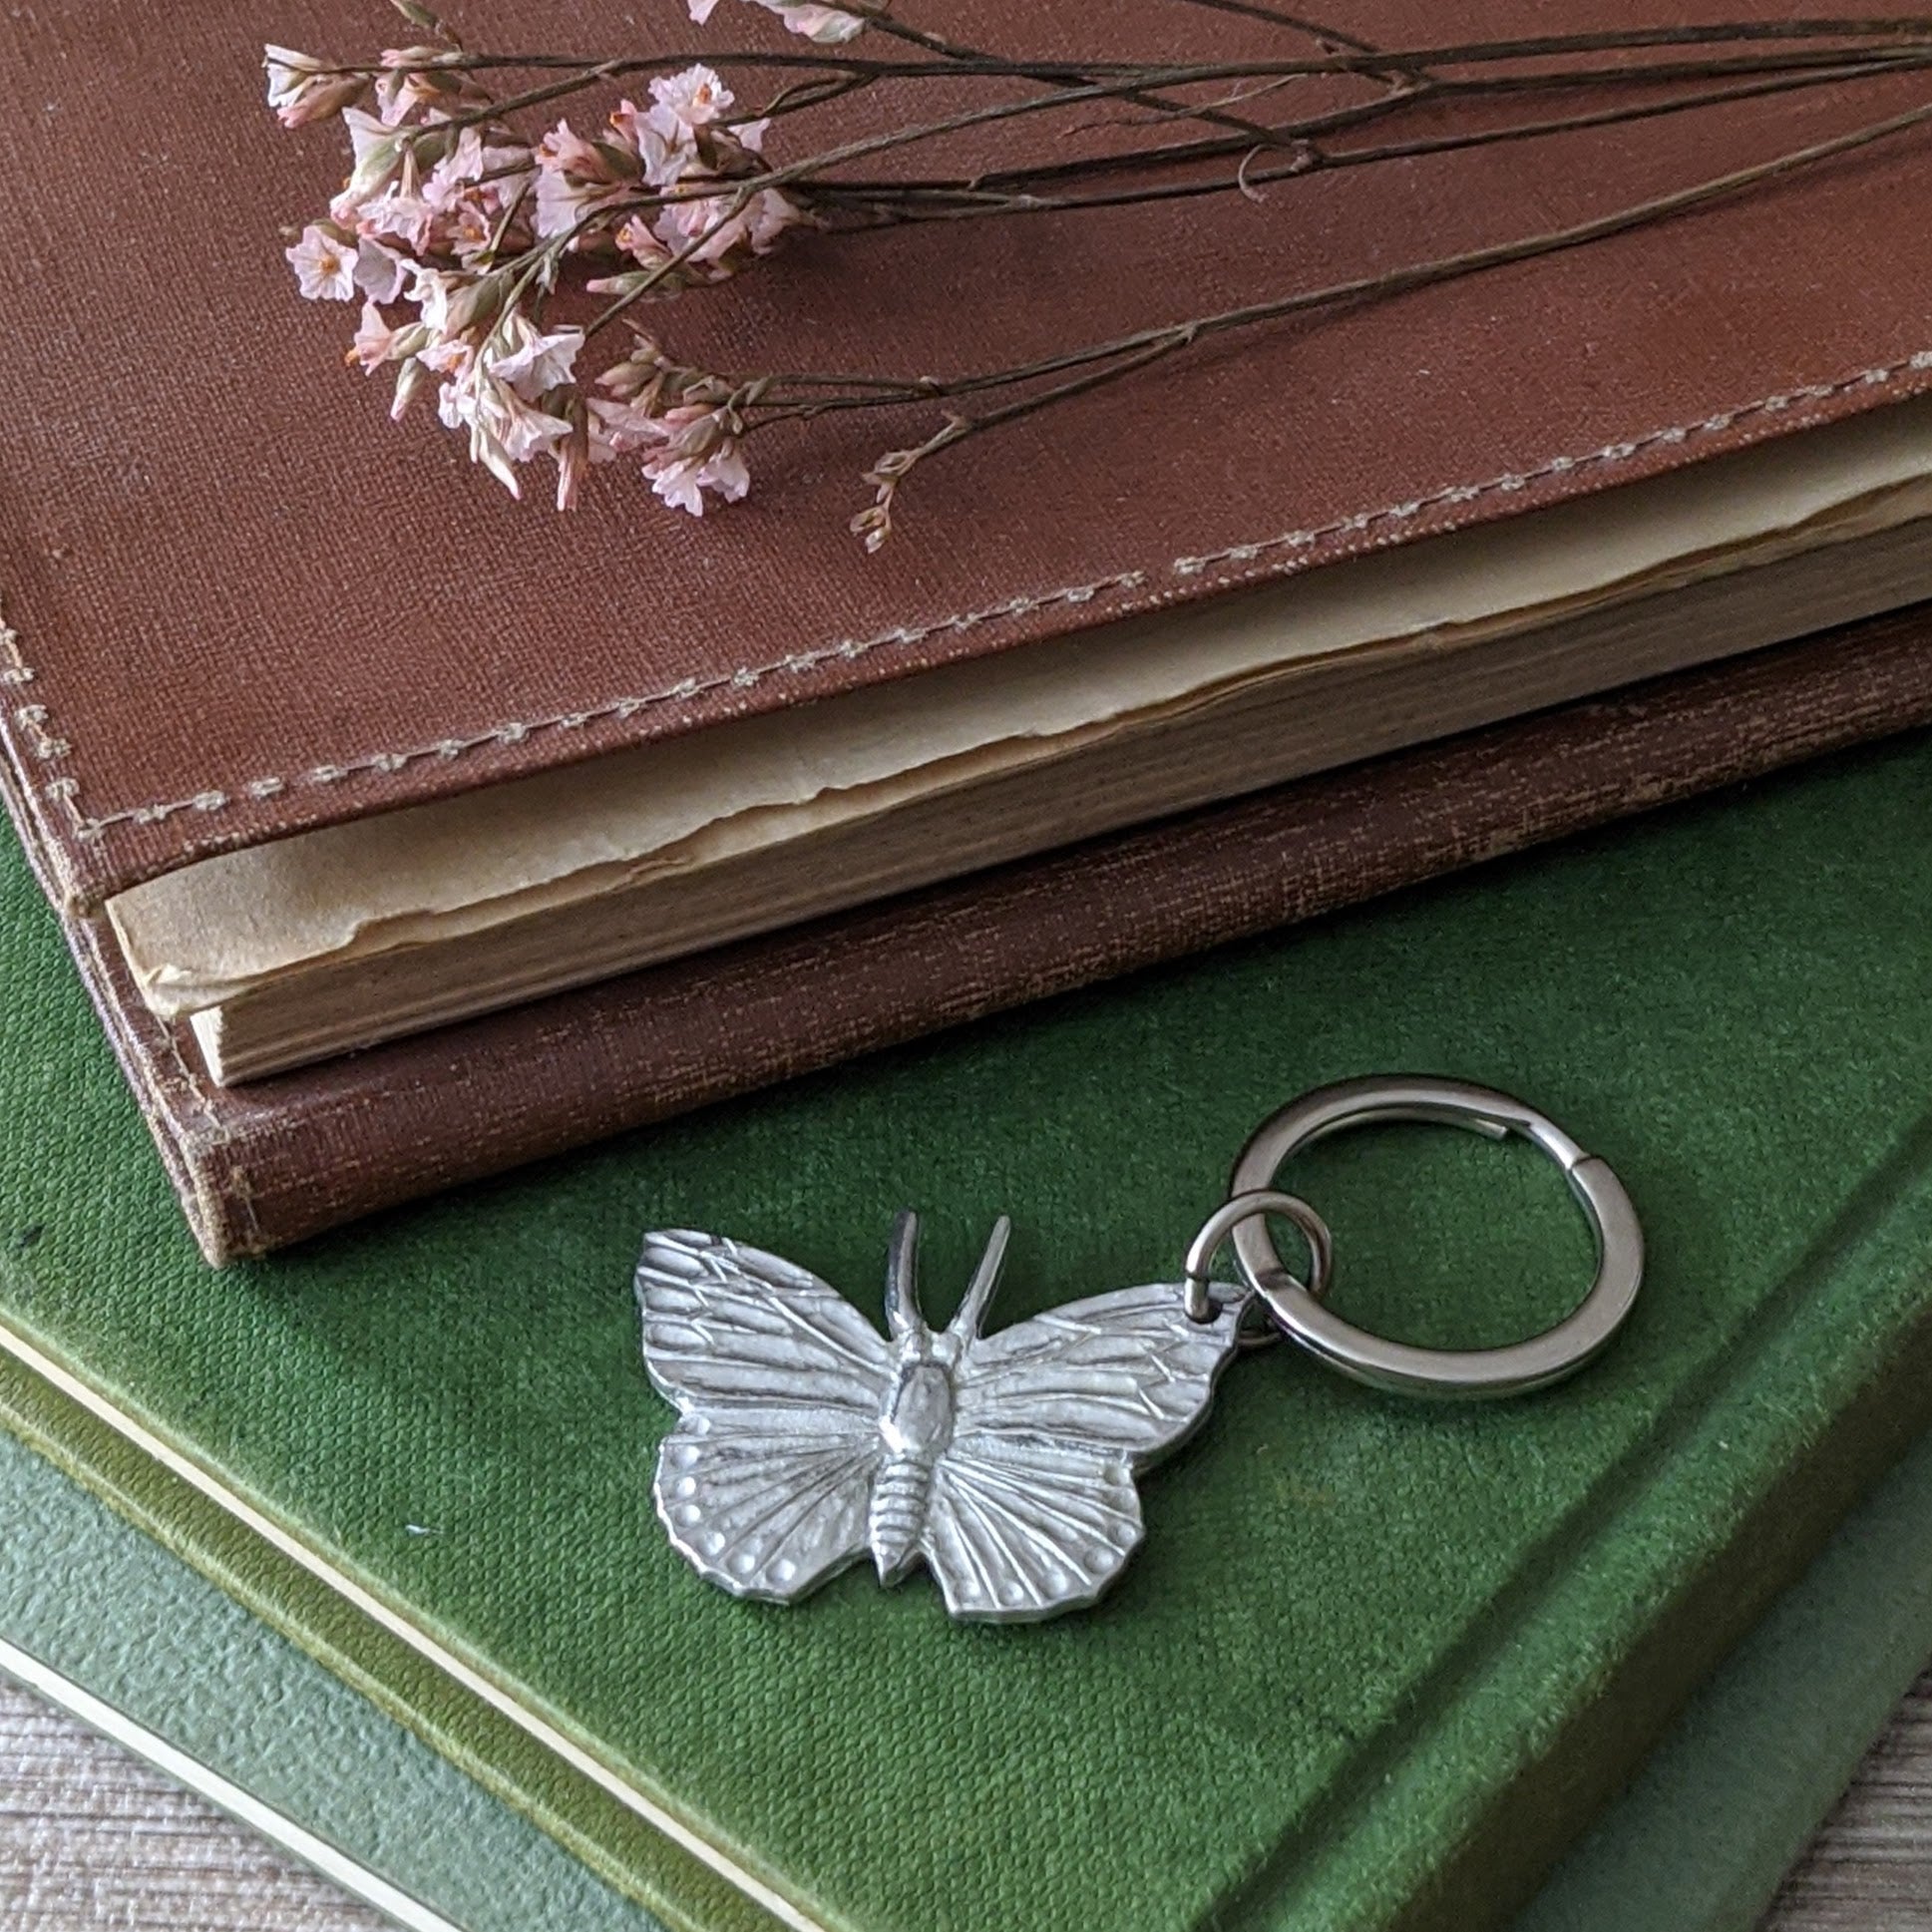 PEWTER BUTTERFLY KEY RING